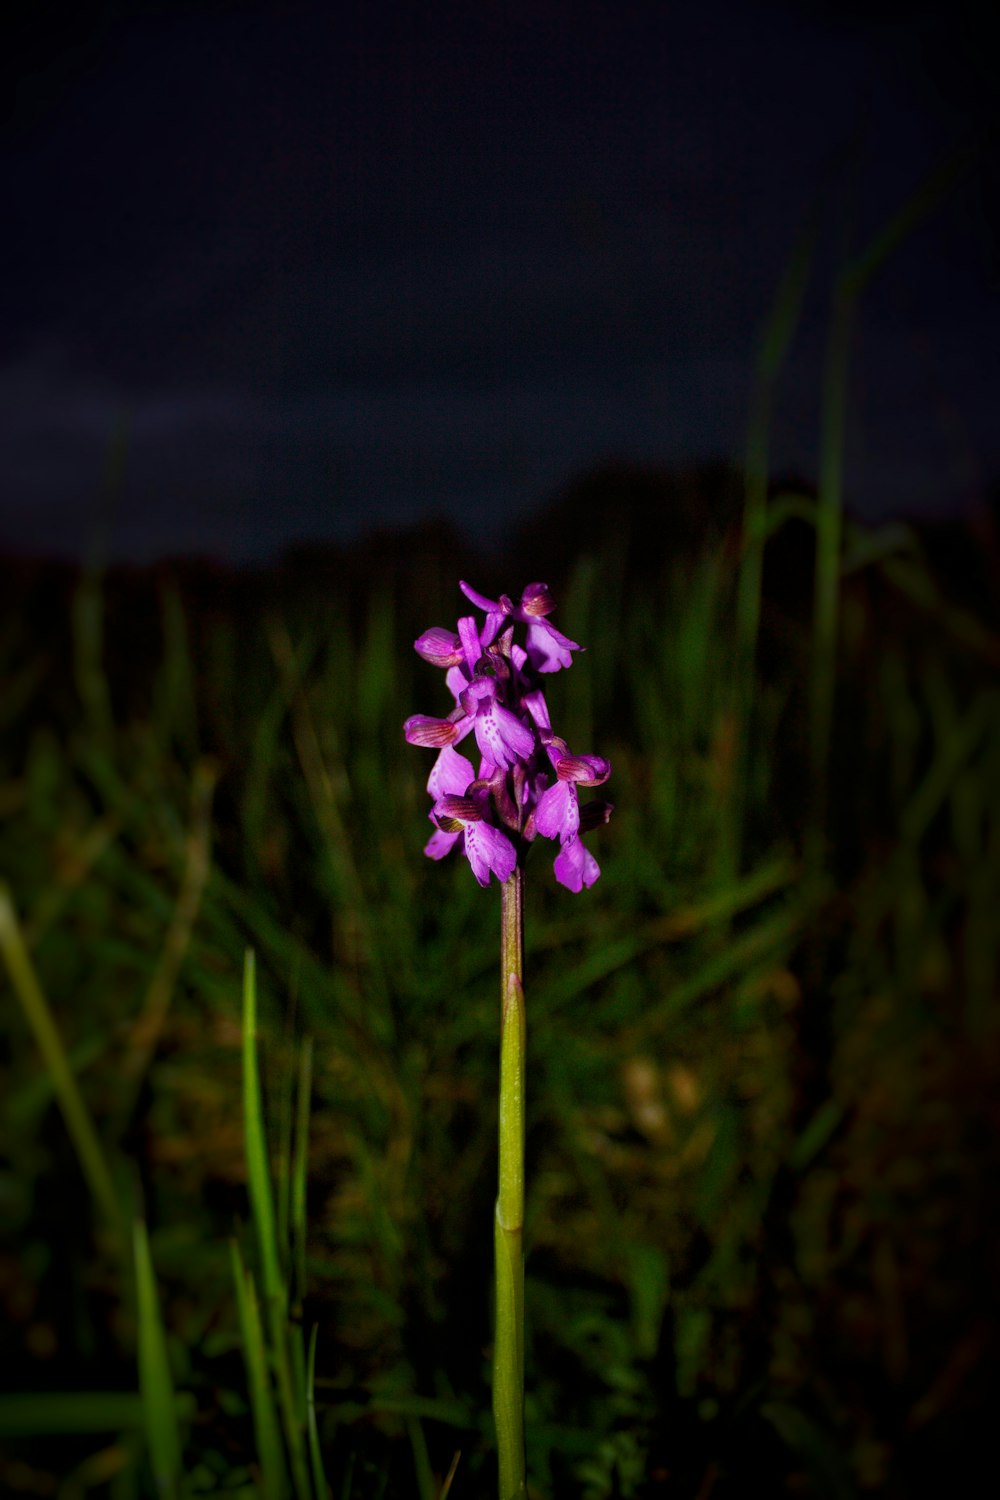 a purple flower in a grassy field at night